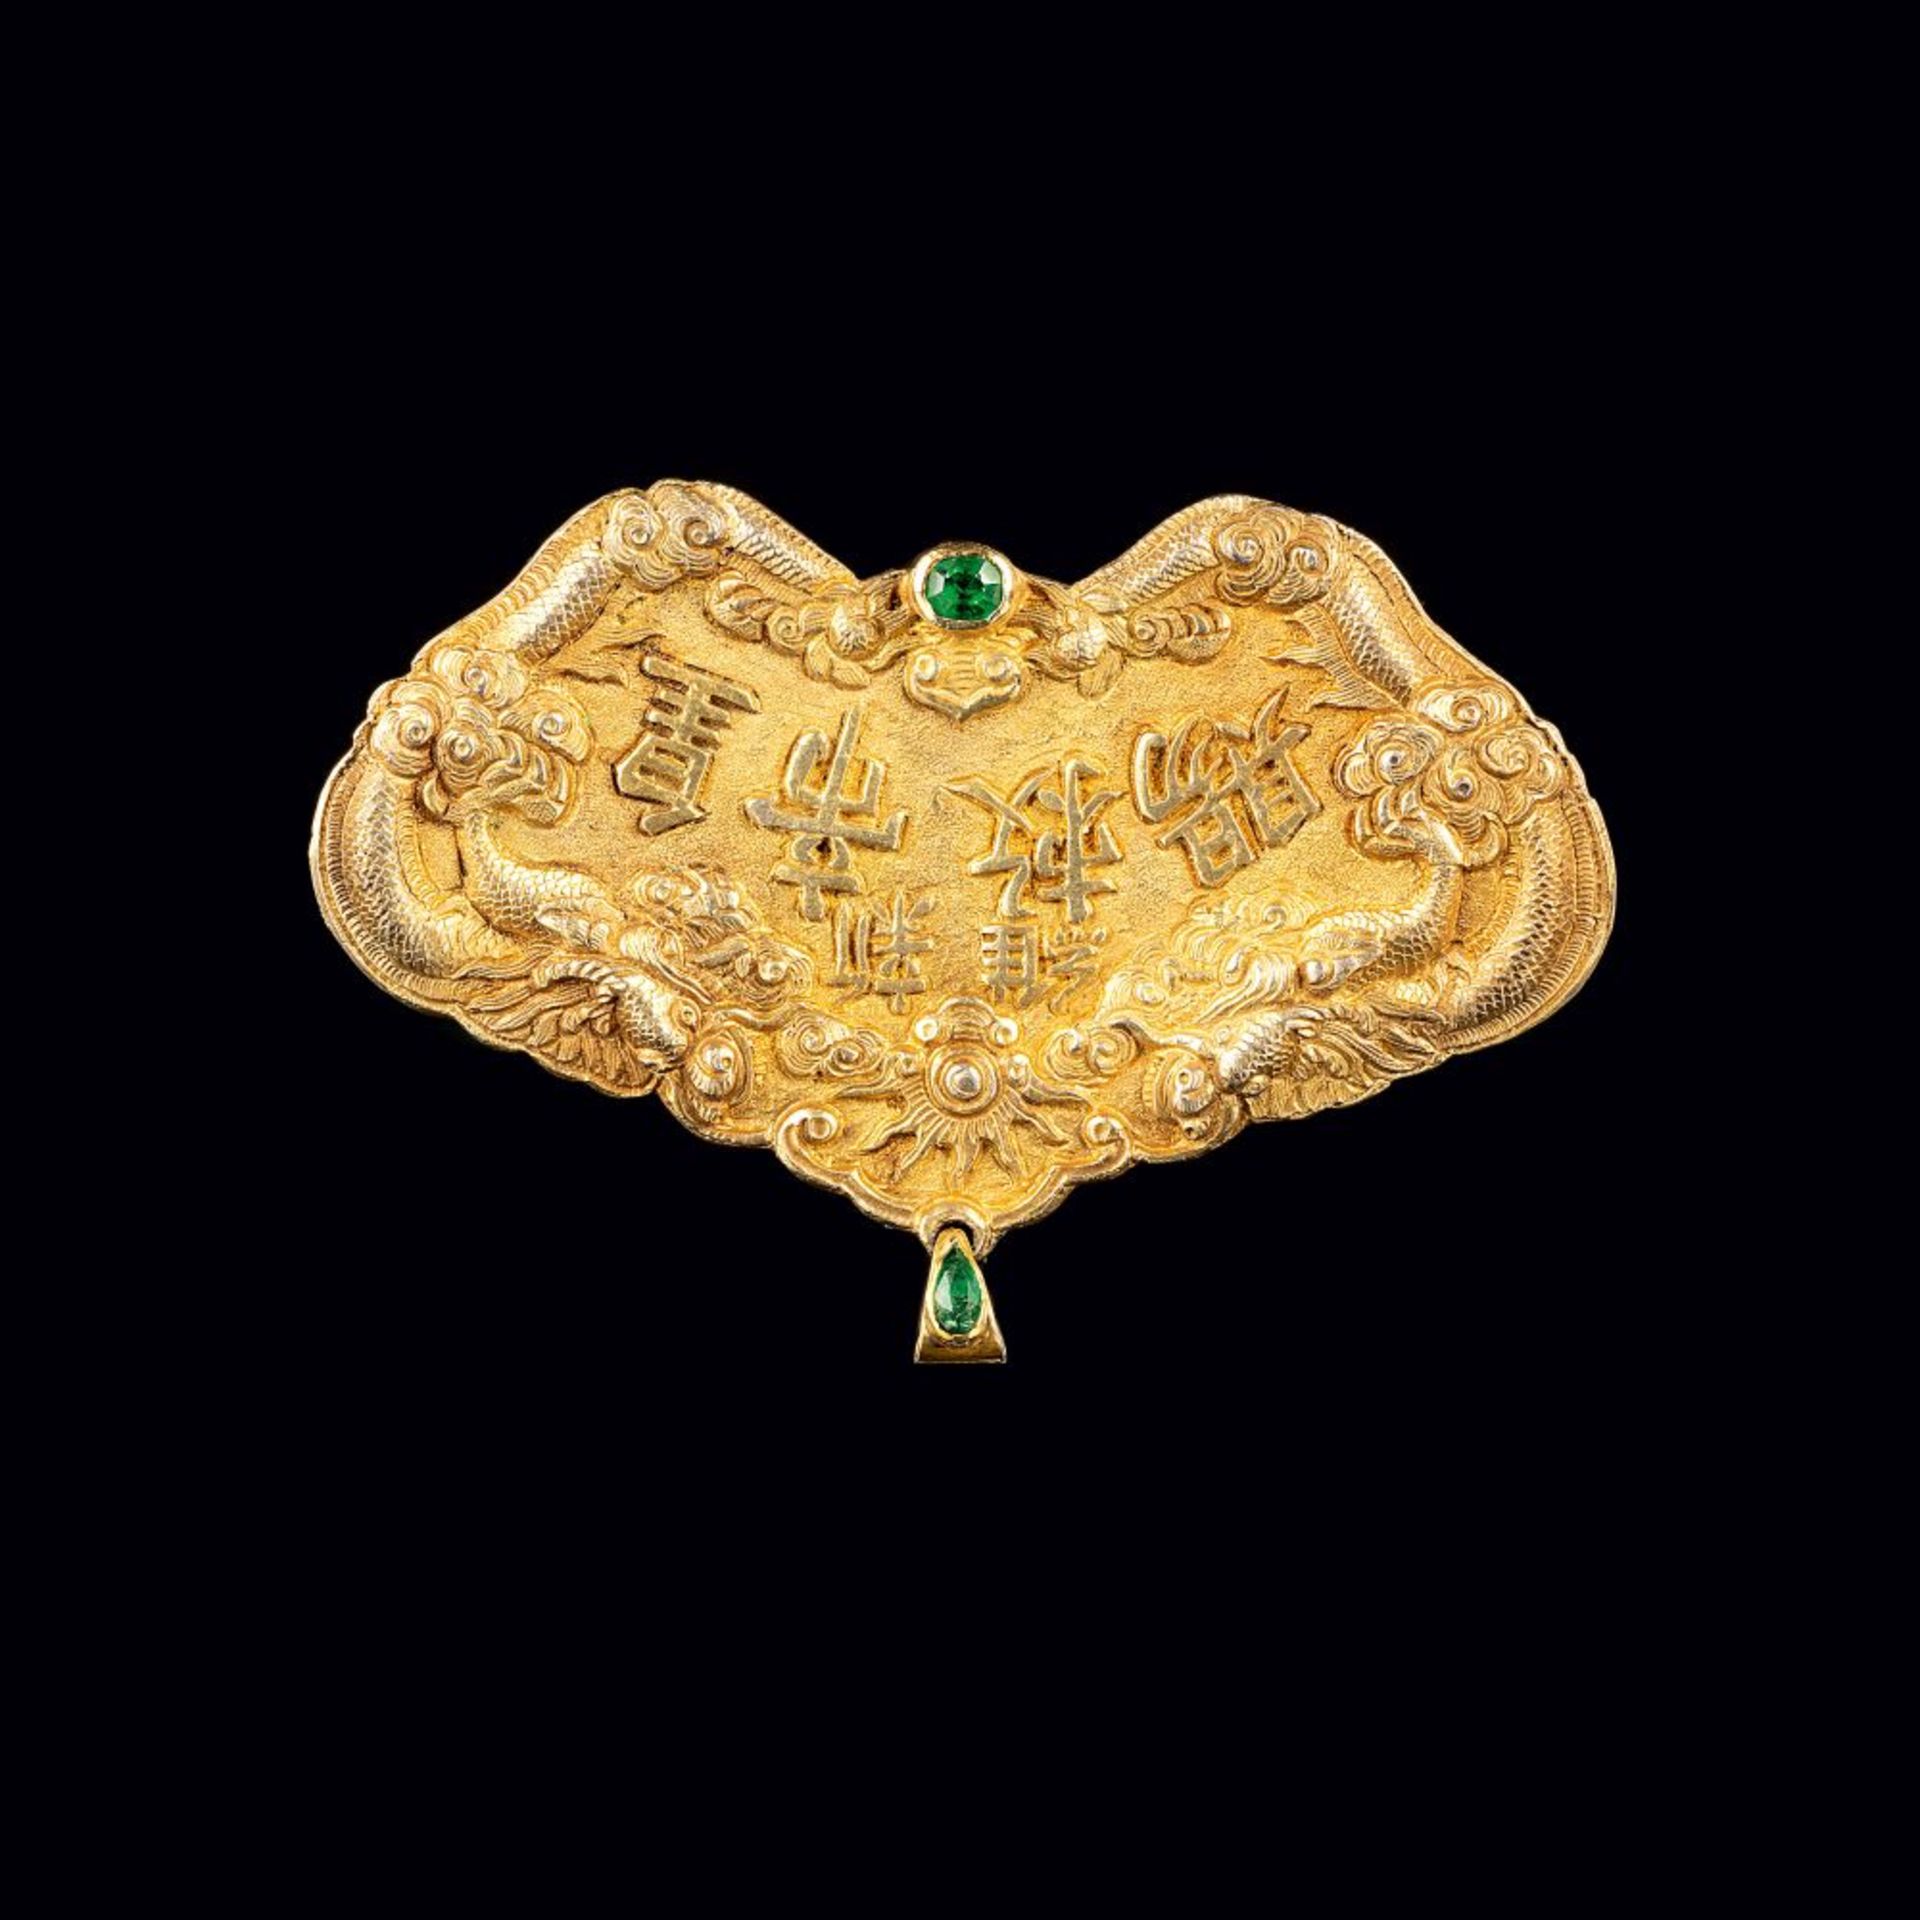 An Emporer Pendant with Ornaments of Dragons.